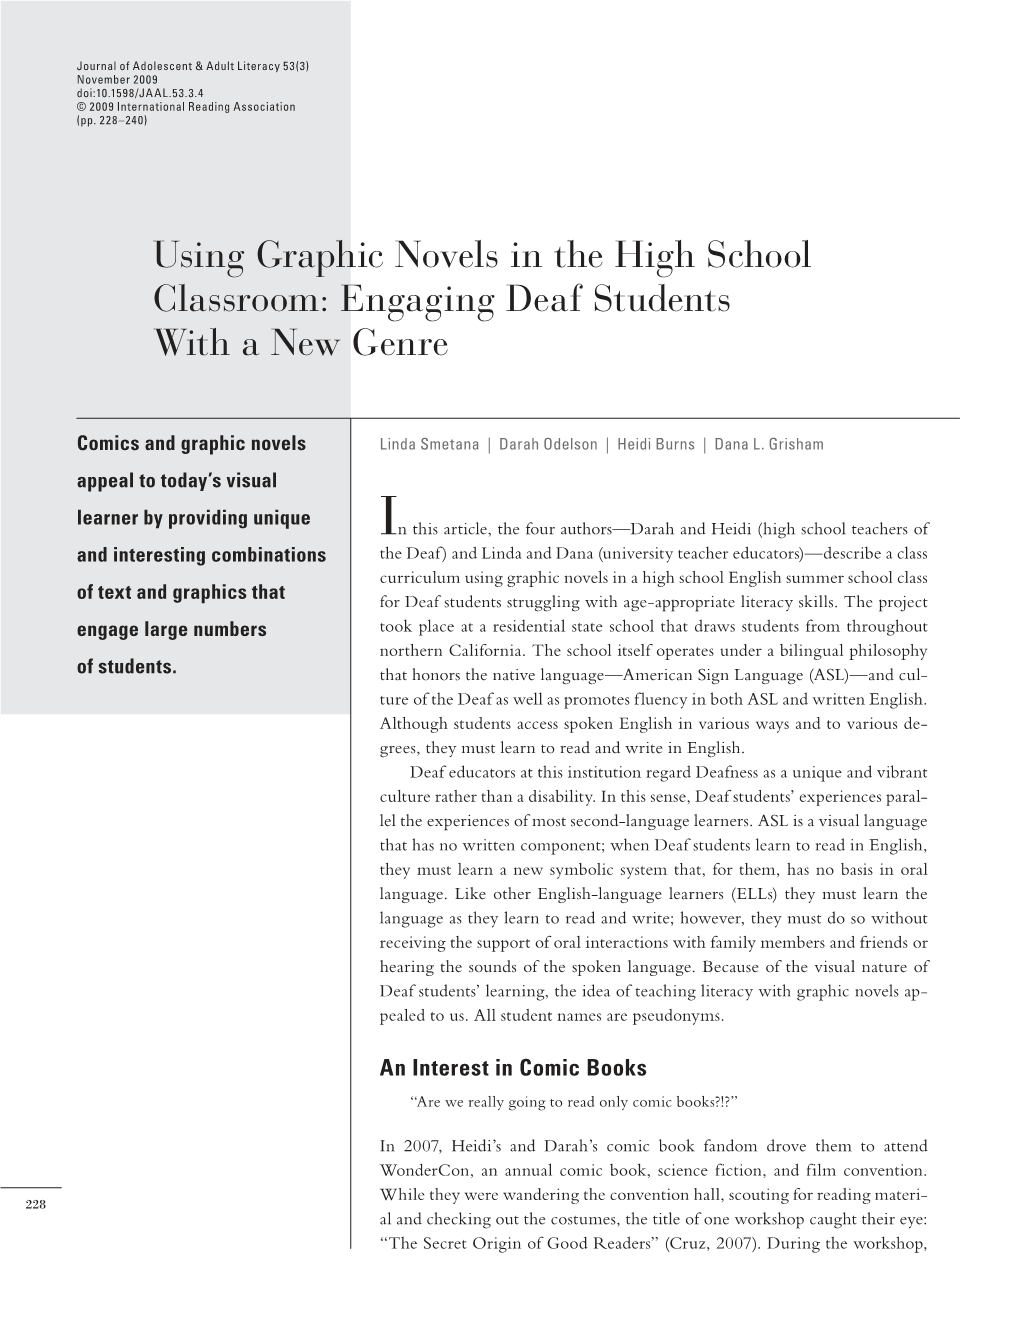 Engaging Deaf Students with a New Genre